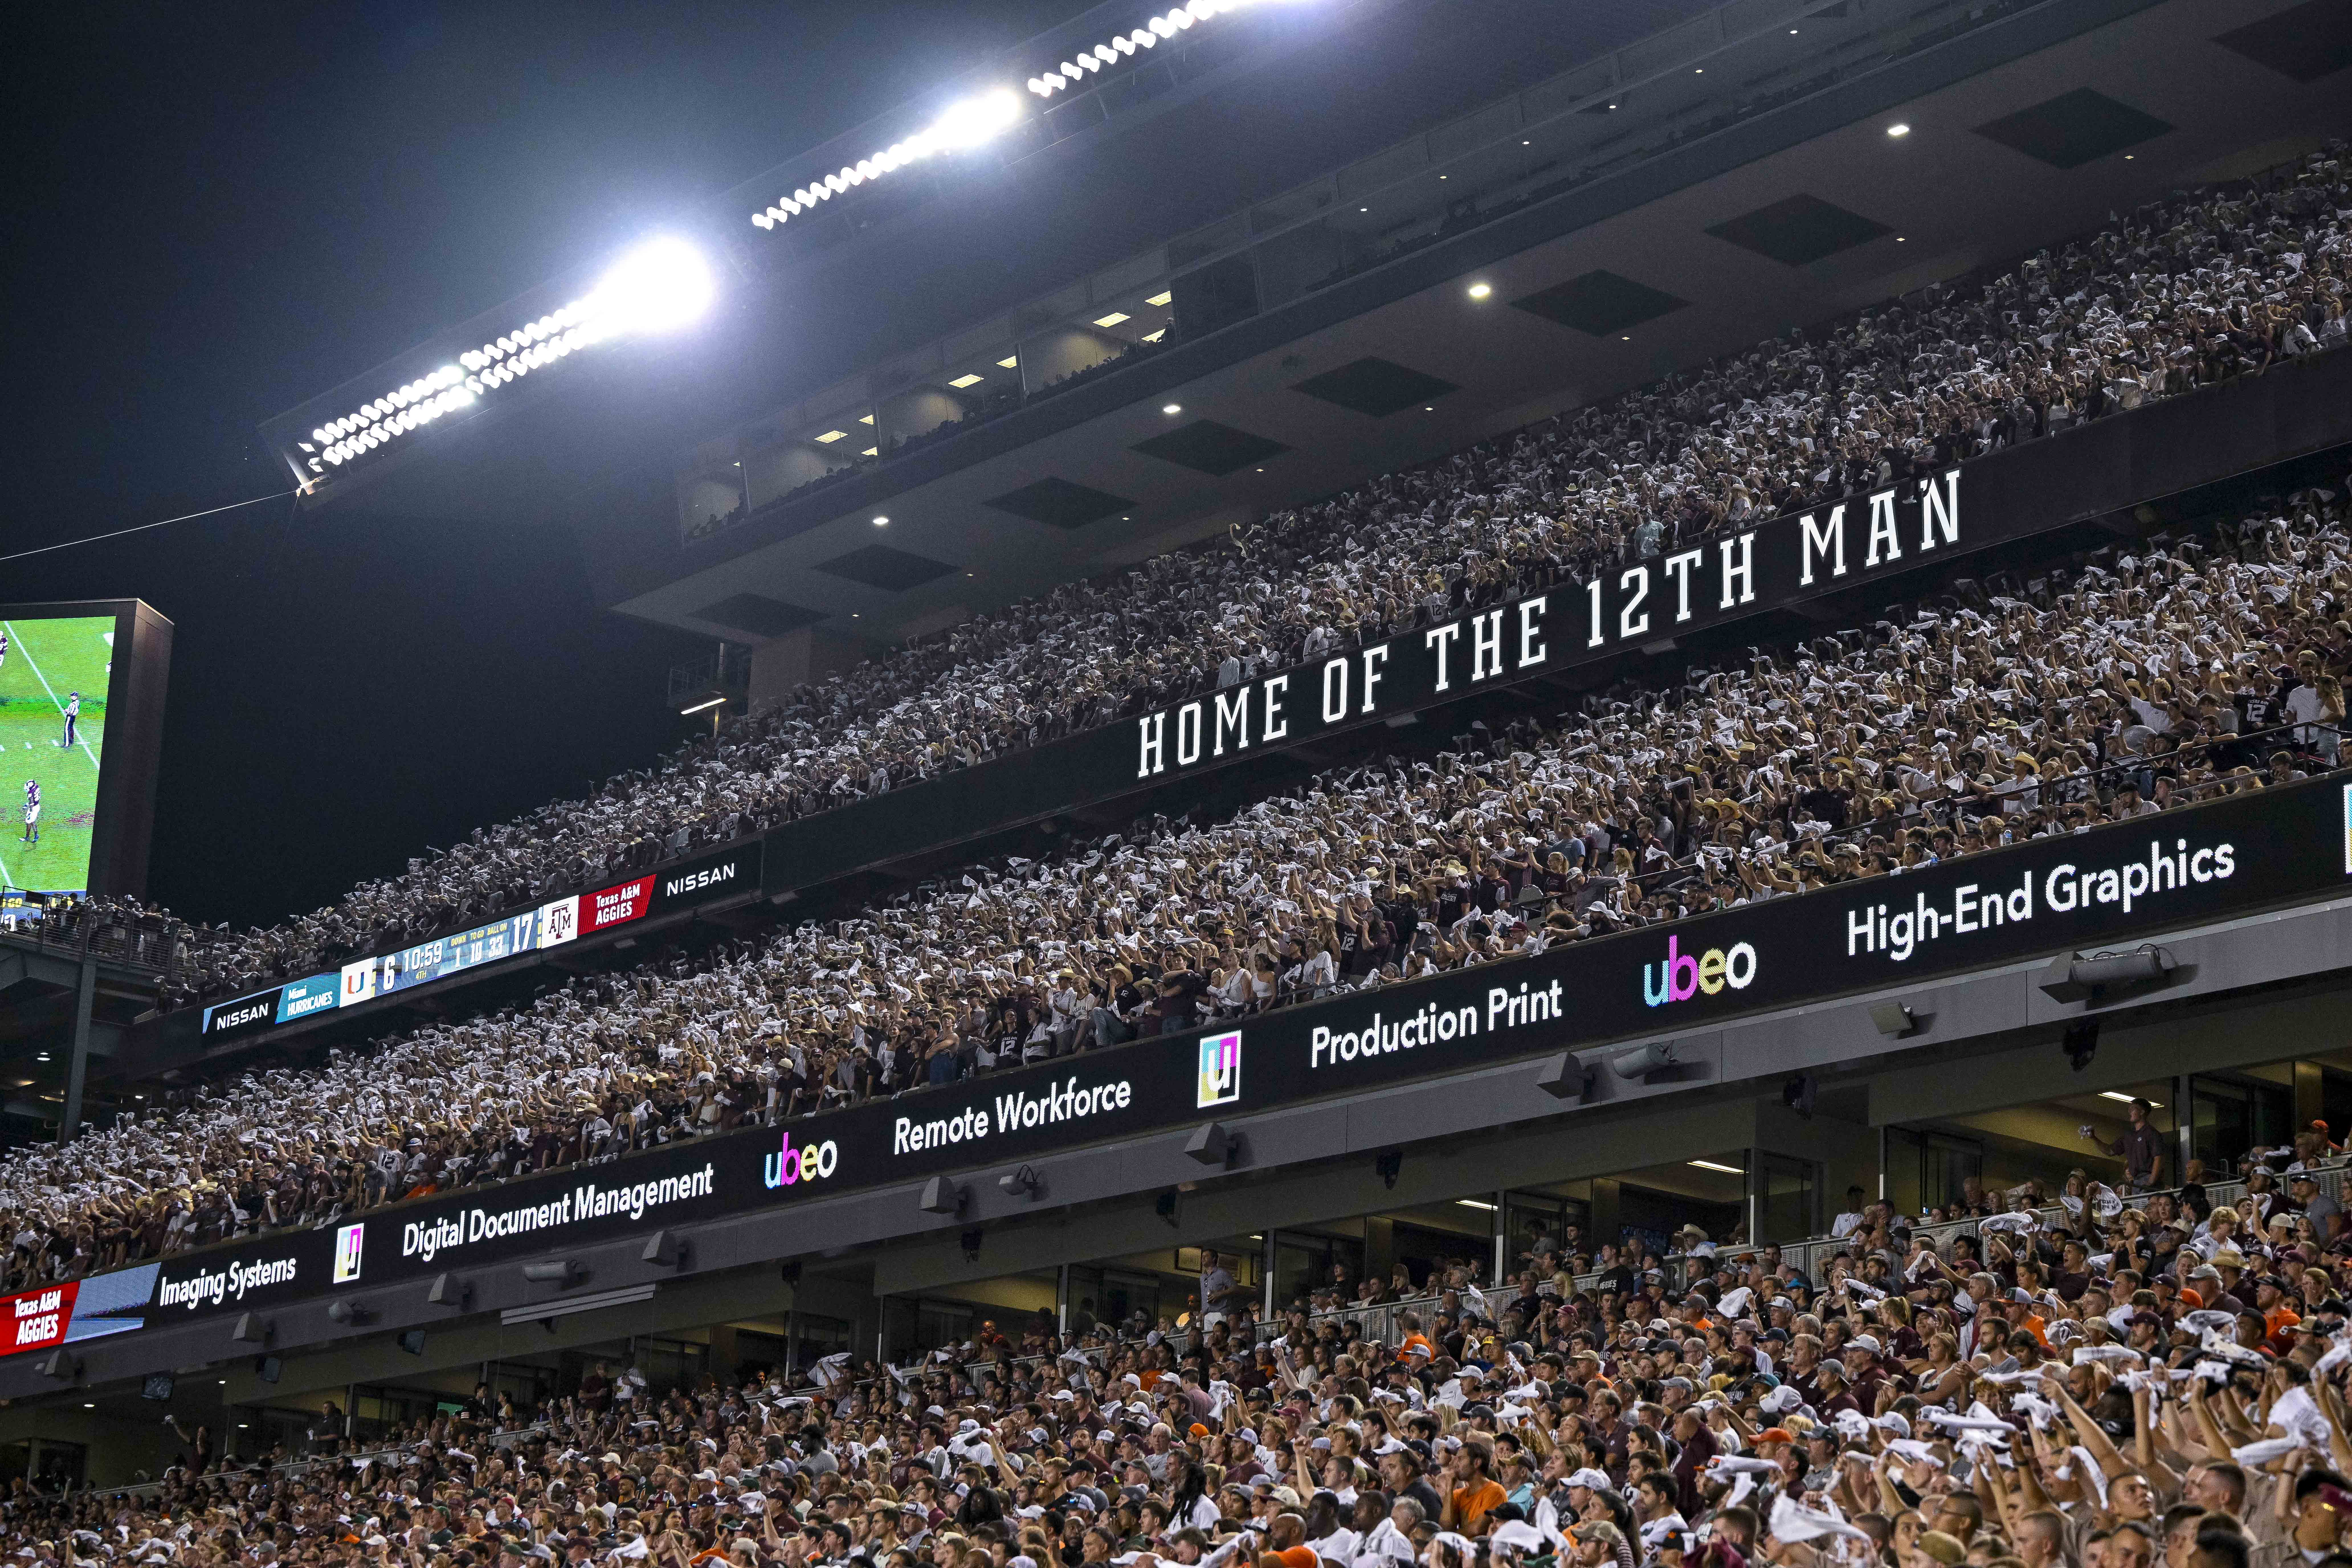 Sep 17, 2022; College Station, Texas, USA; A view of the fans and the stands and the 12th Man logo during the second half of the game between the Texas A&M Aggies and the Miami Hurricanes at Kyle Field. 